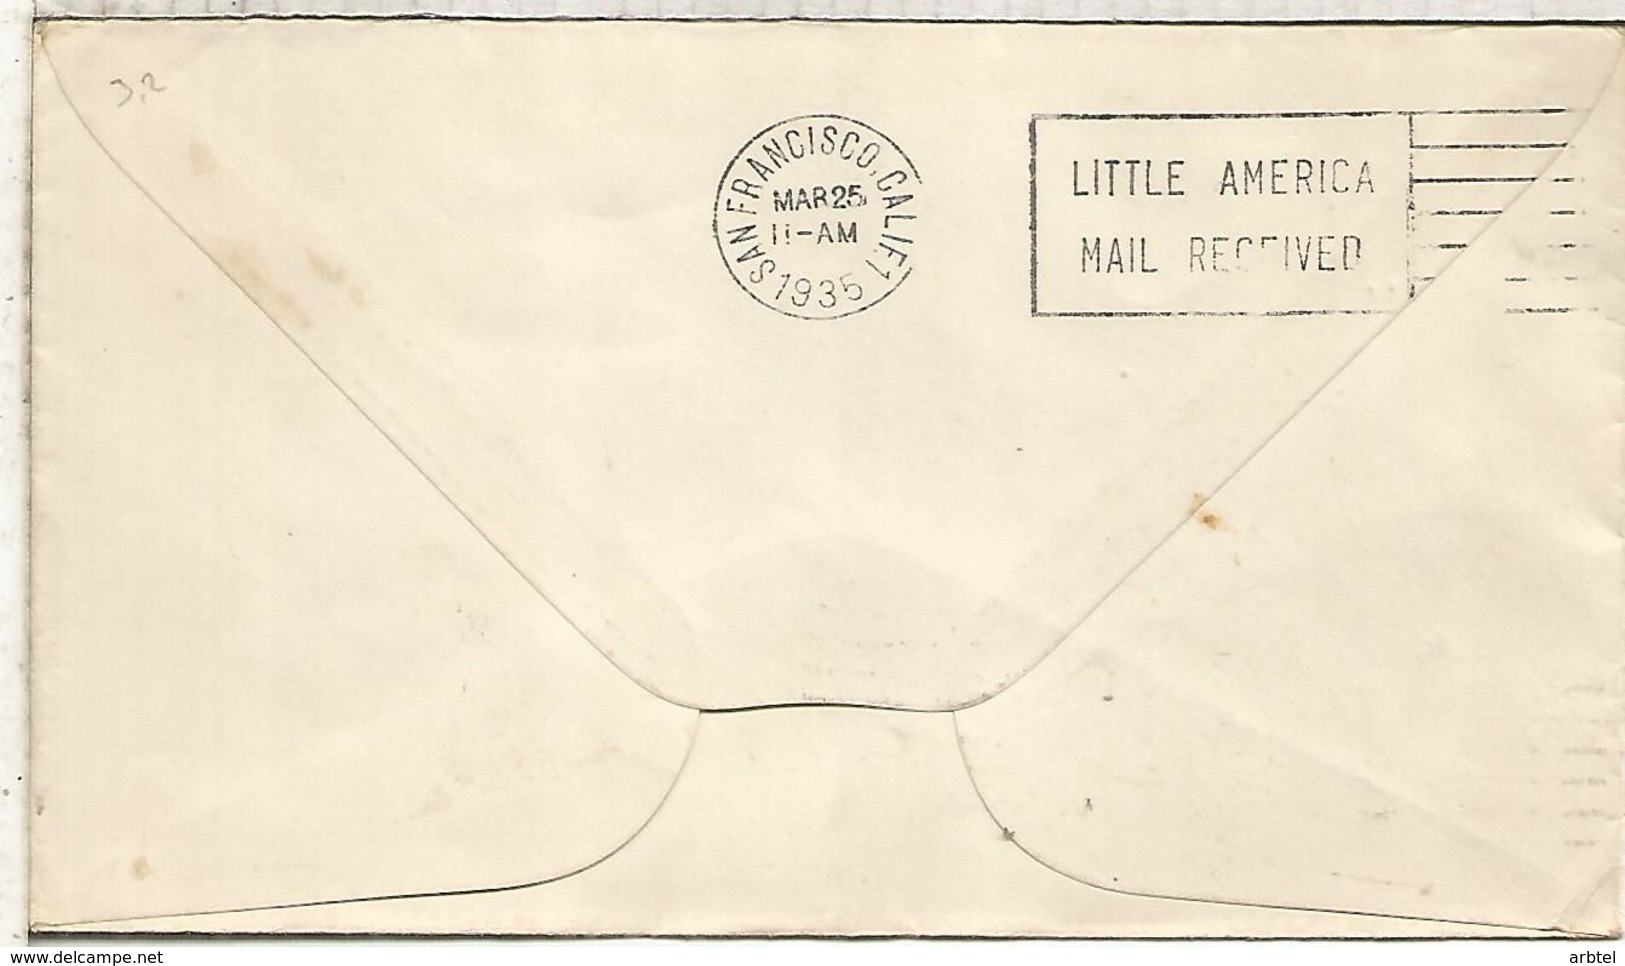 USA 1934 BYRD ANTARCTIC EXPEDITION LITTLE AMERICA POSTMAR WITH VERY RARE DATE 30 JAN 1934 INSTEAD USUAL 31 JAN - Expediciones Antárticas